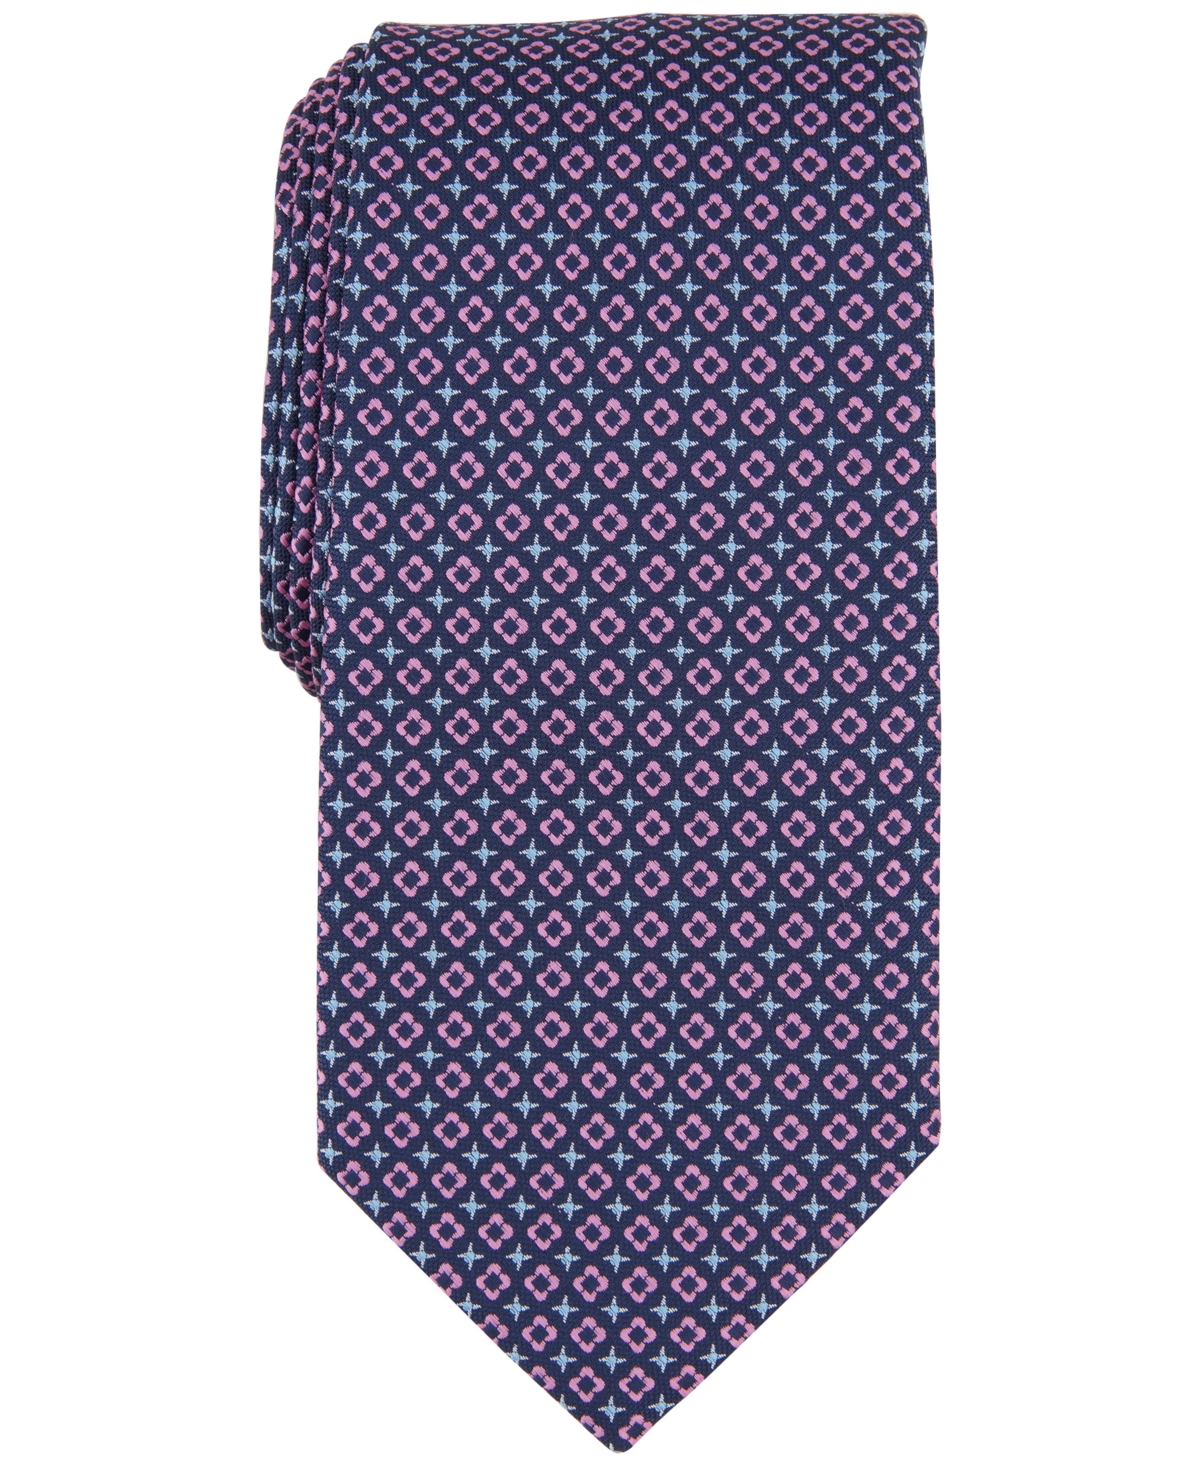 Men's Classic Floral Medallion Neat Tie, Created for Macy's - Pink